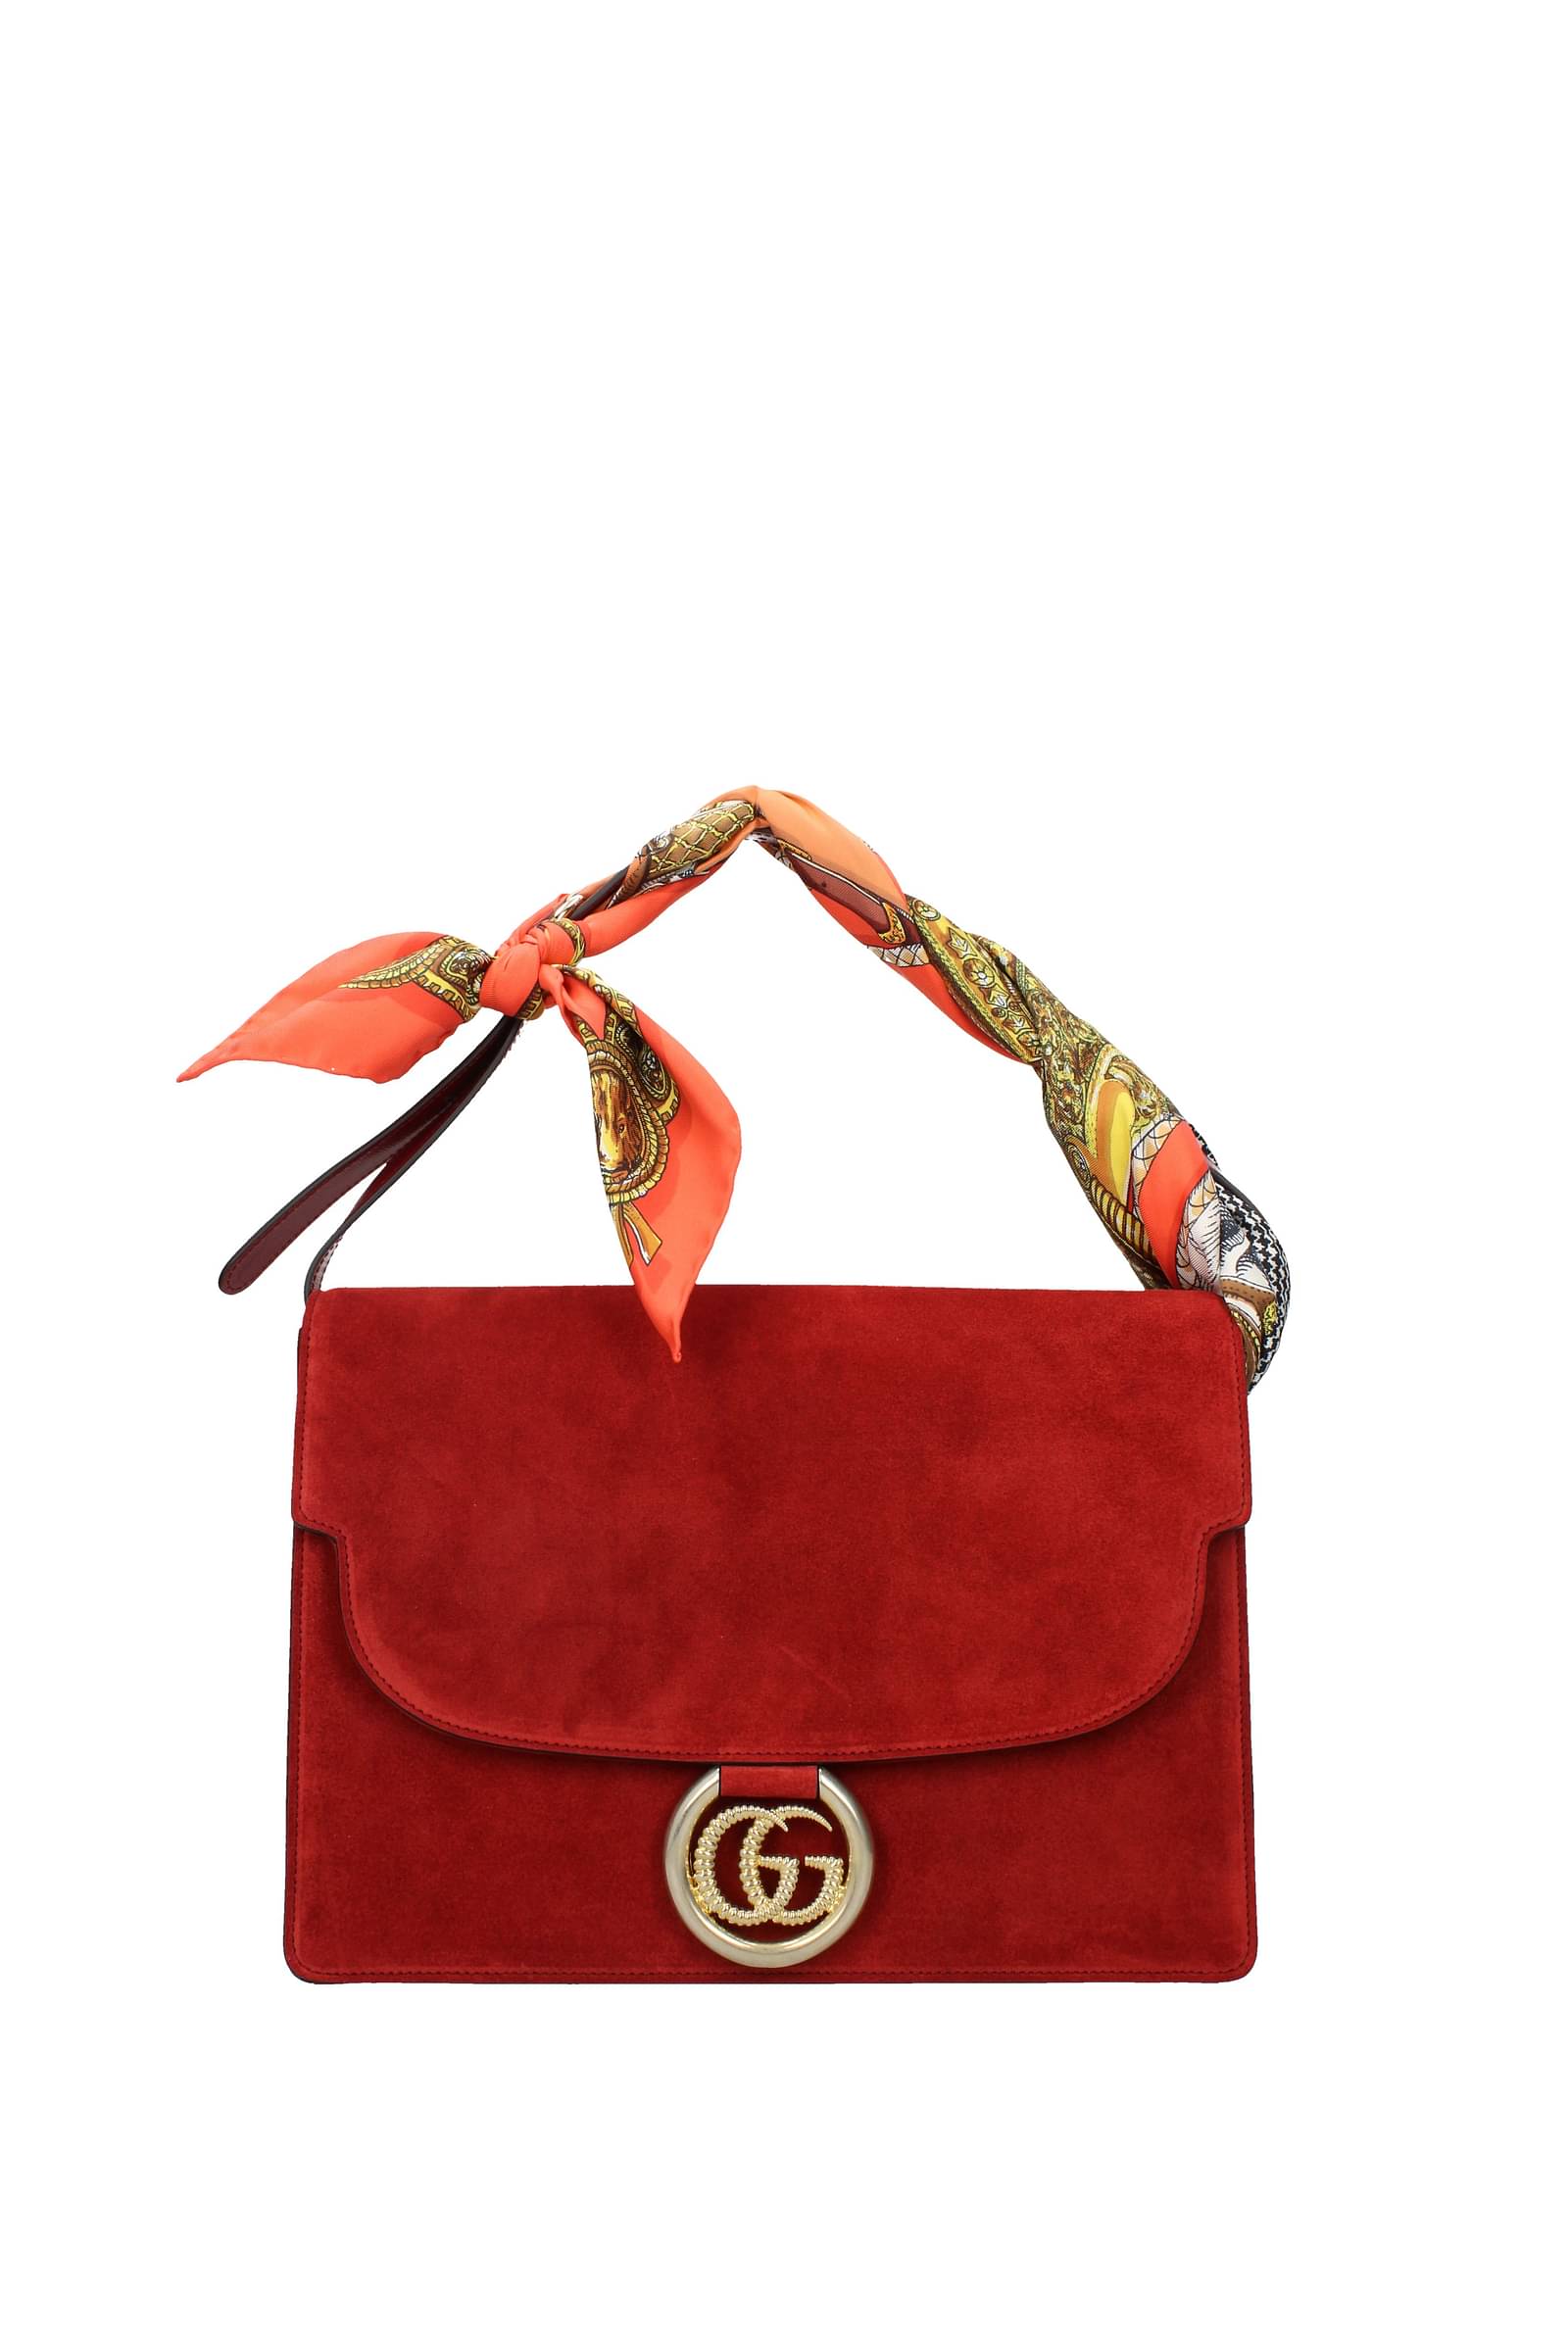 gucci bags outlet